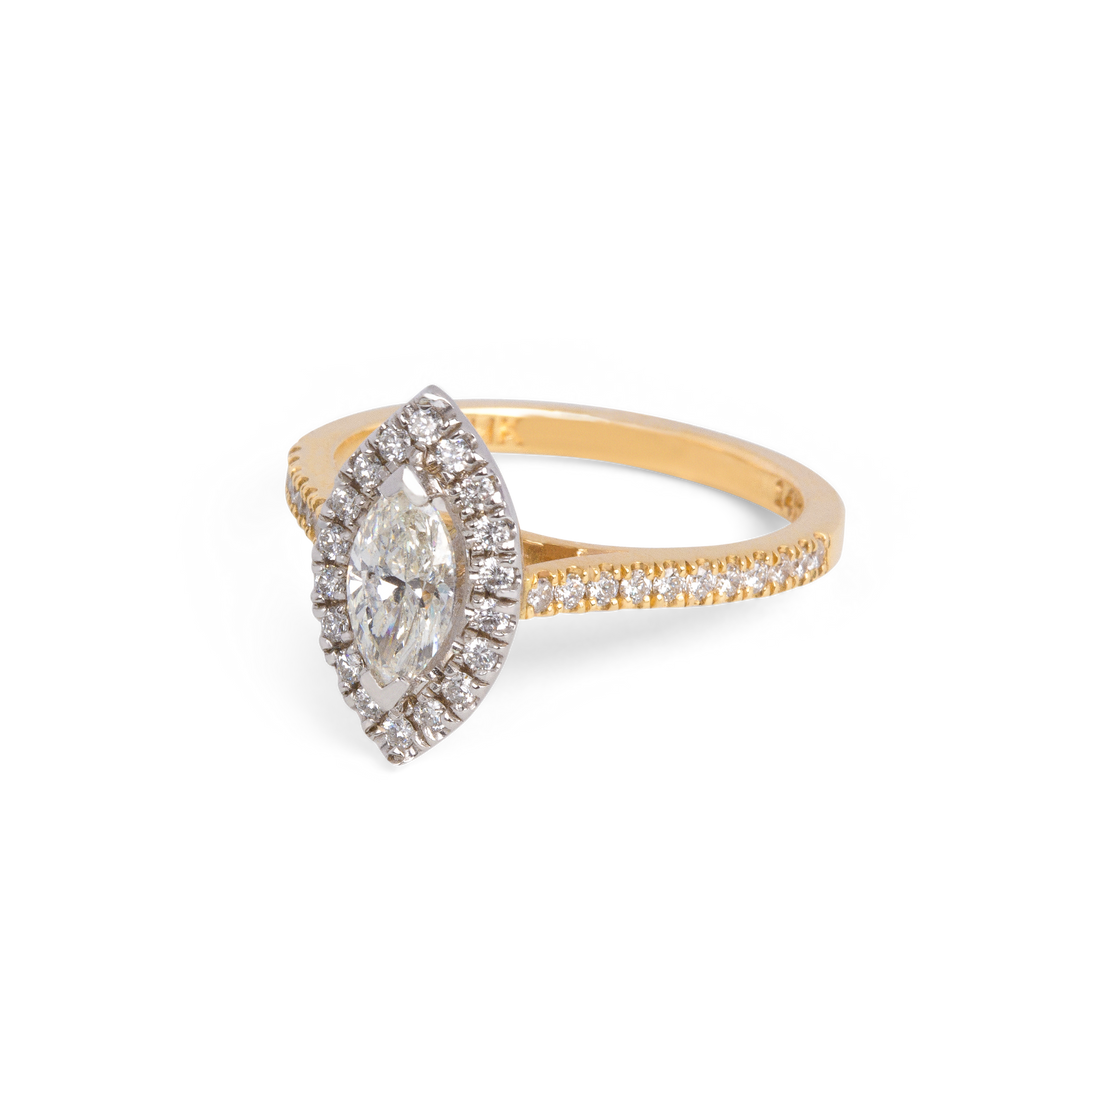 Halo Marquise Engagement Ring | 0.96 CT | 14k Yellow/White/Rose Gold